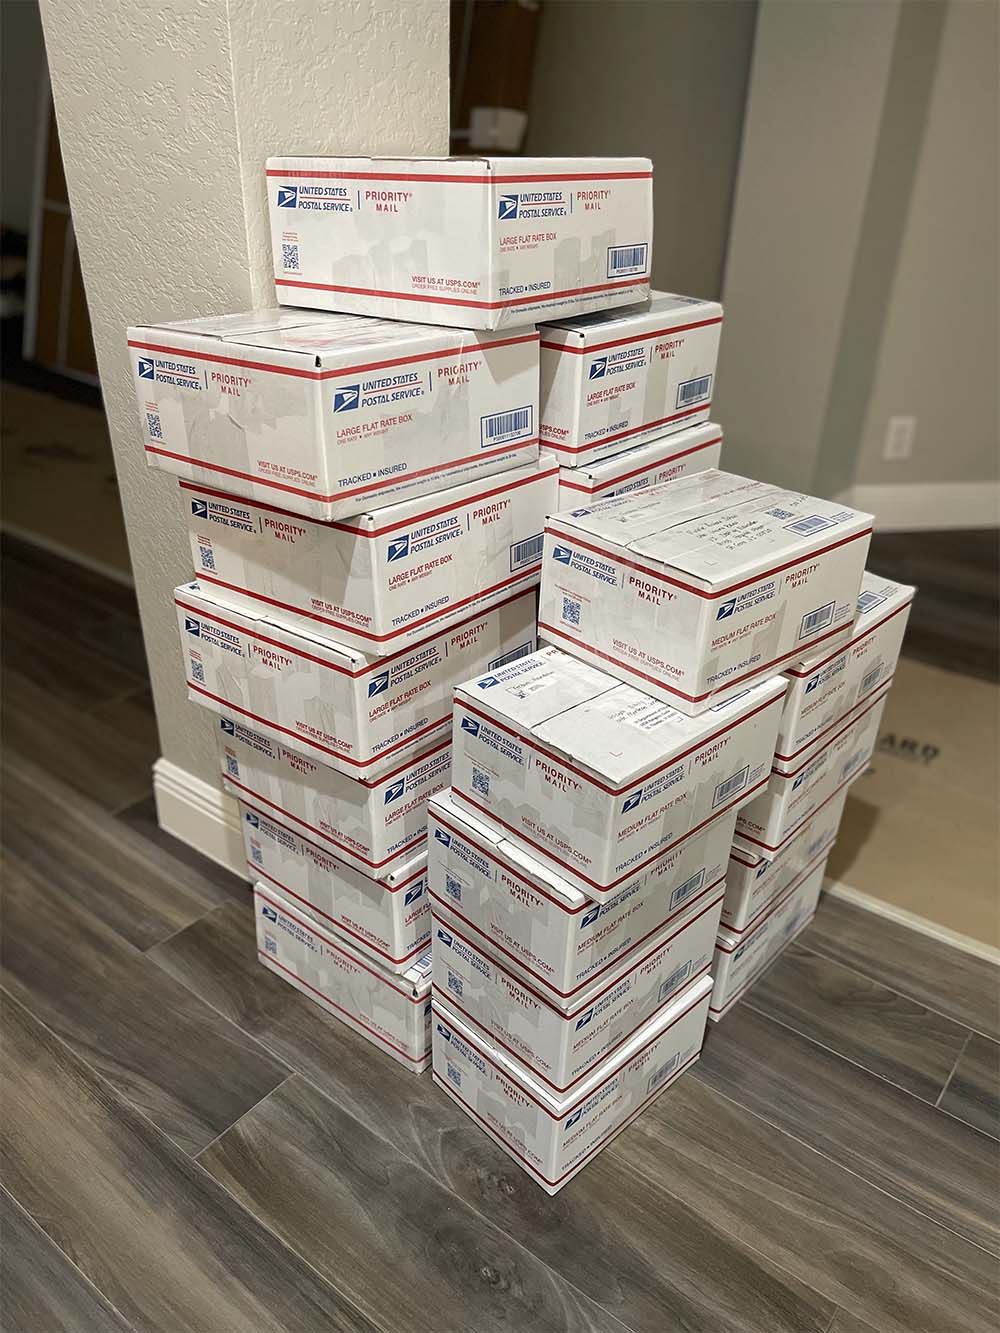 Books in postal boxes ready to be mailed